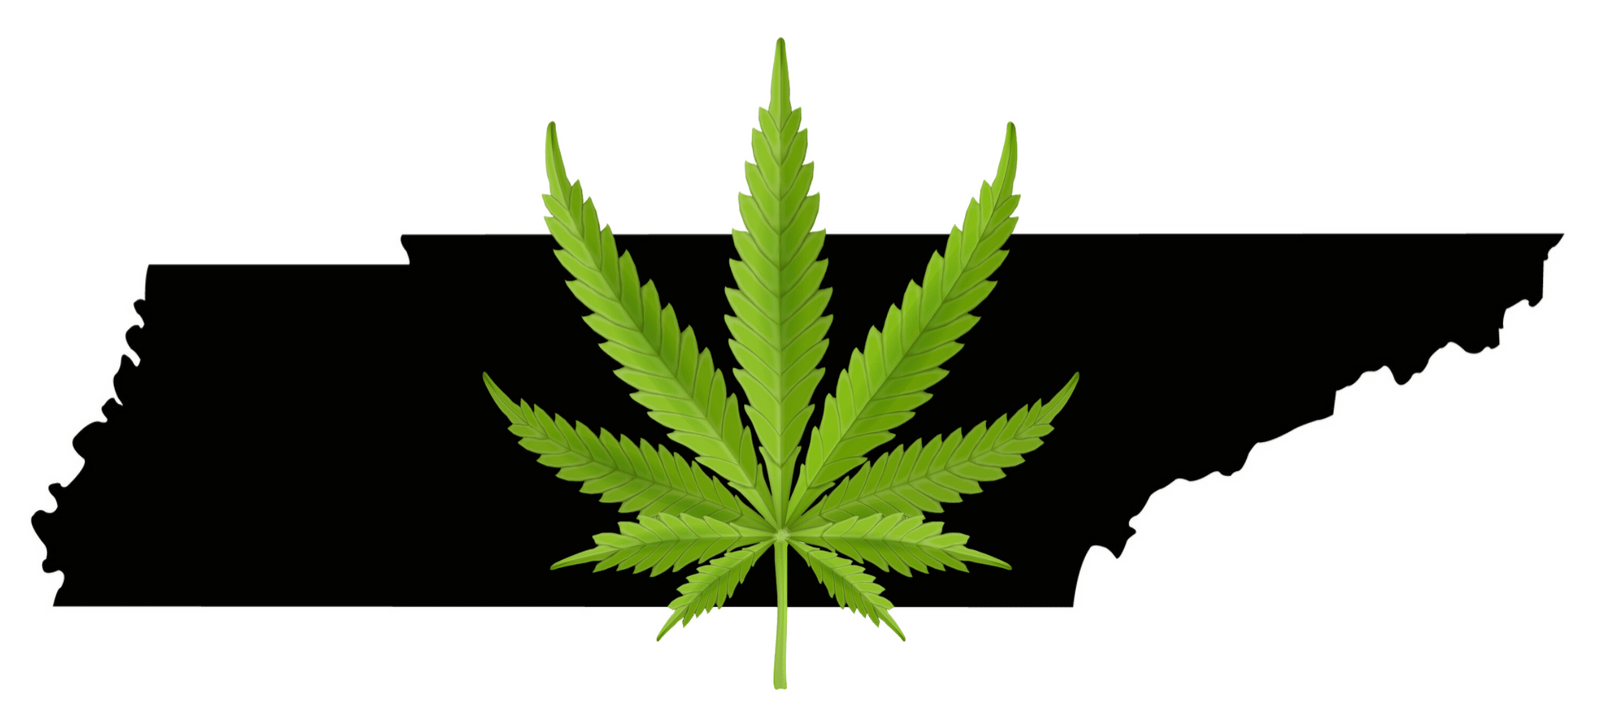 The Legality of Hemp in Tennessee